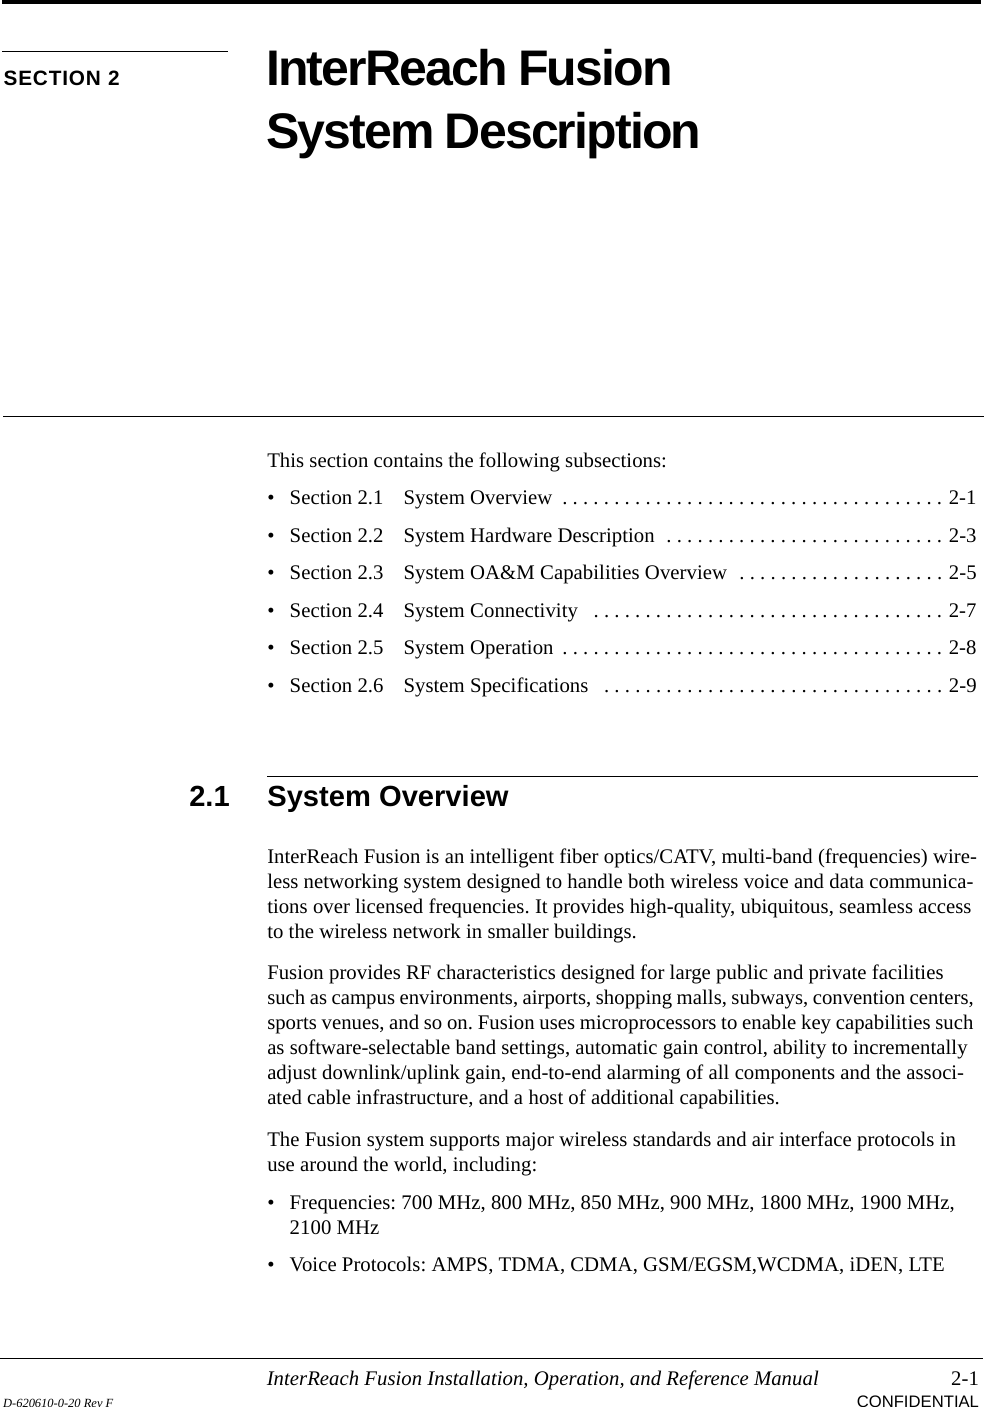 InterReach Fusion Installation, Operation, and Reference Manual 2-1D-620610-0-20 Rev F CONFIDENTIALSECTION 2 InterReach Fusion System DescriptionThis section contains the following subsections:• Section 2.1   System Overview  . . . . . . . . . . . . . . . . . . . . . . . . . . . . . . . . . . . . . 2-1• Section 2.2   System Hardware Description  . . . . . . . . . . . . . . . . . . . . . . . . . . . 2-3• Section 2.3   System OA&amp;M Capabilities Overview  . . . . . . . . . . . . . . . . . . . . 2-5• Section 2.4   System Connectivity   . . . . . . . . . . . . . . . . . . . . . . . . . . . . . . . . . . 2-7• Section 2.5   System Operation  . . . . . . . . . . . . . . . . . . . . . . . . . . . . . . . . . . . . . 2-8• Section 2.6   System Specifications   . . . . . . . . . . . . . . . . . . . . . . . . . . . . . . . . . 2-92.1 System OverviewInterReach Fusion is an intelligent fiber optics/CATV, multi-band (frequencies) wire-less networking system designed to handle both wireless voice and data communica-tions over licensed frequencies. It provides high-quality, ubiquitous, seamless access to the wireless network in smaller buildings.Fusion provides RF characteristics designed for large public and private facilities such as campus environments, airports, shopping malls, subways, convention centers, sports venues, and so on. Fusion uses microprocessors to enable key capabilities such as software-selectable band settings, automatic gain control, ability to incrementally adjust downlink/uplink gain, end-to-end alarming of all components and the associ-ated cable infrastructure, and a host of additional capabilities.The Fusion system supports major wireless standards and air interface protocols in use around the world, including:• Frequencies: 700 MHz, 800 MHz, 850 MHz, 900 MHz, 1800 MHz, 1900 MHz, 2100 MHz• Voice Protocols: AMPS, TDMA, CDMA, GSM/EGSM,WCDMA, iDEN, LTE